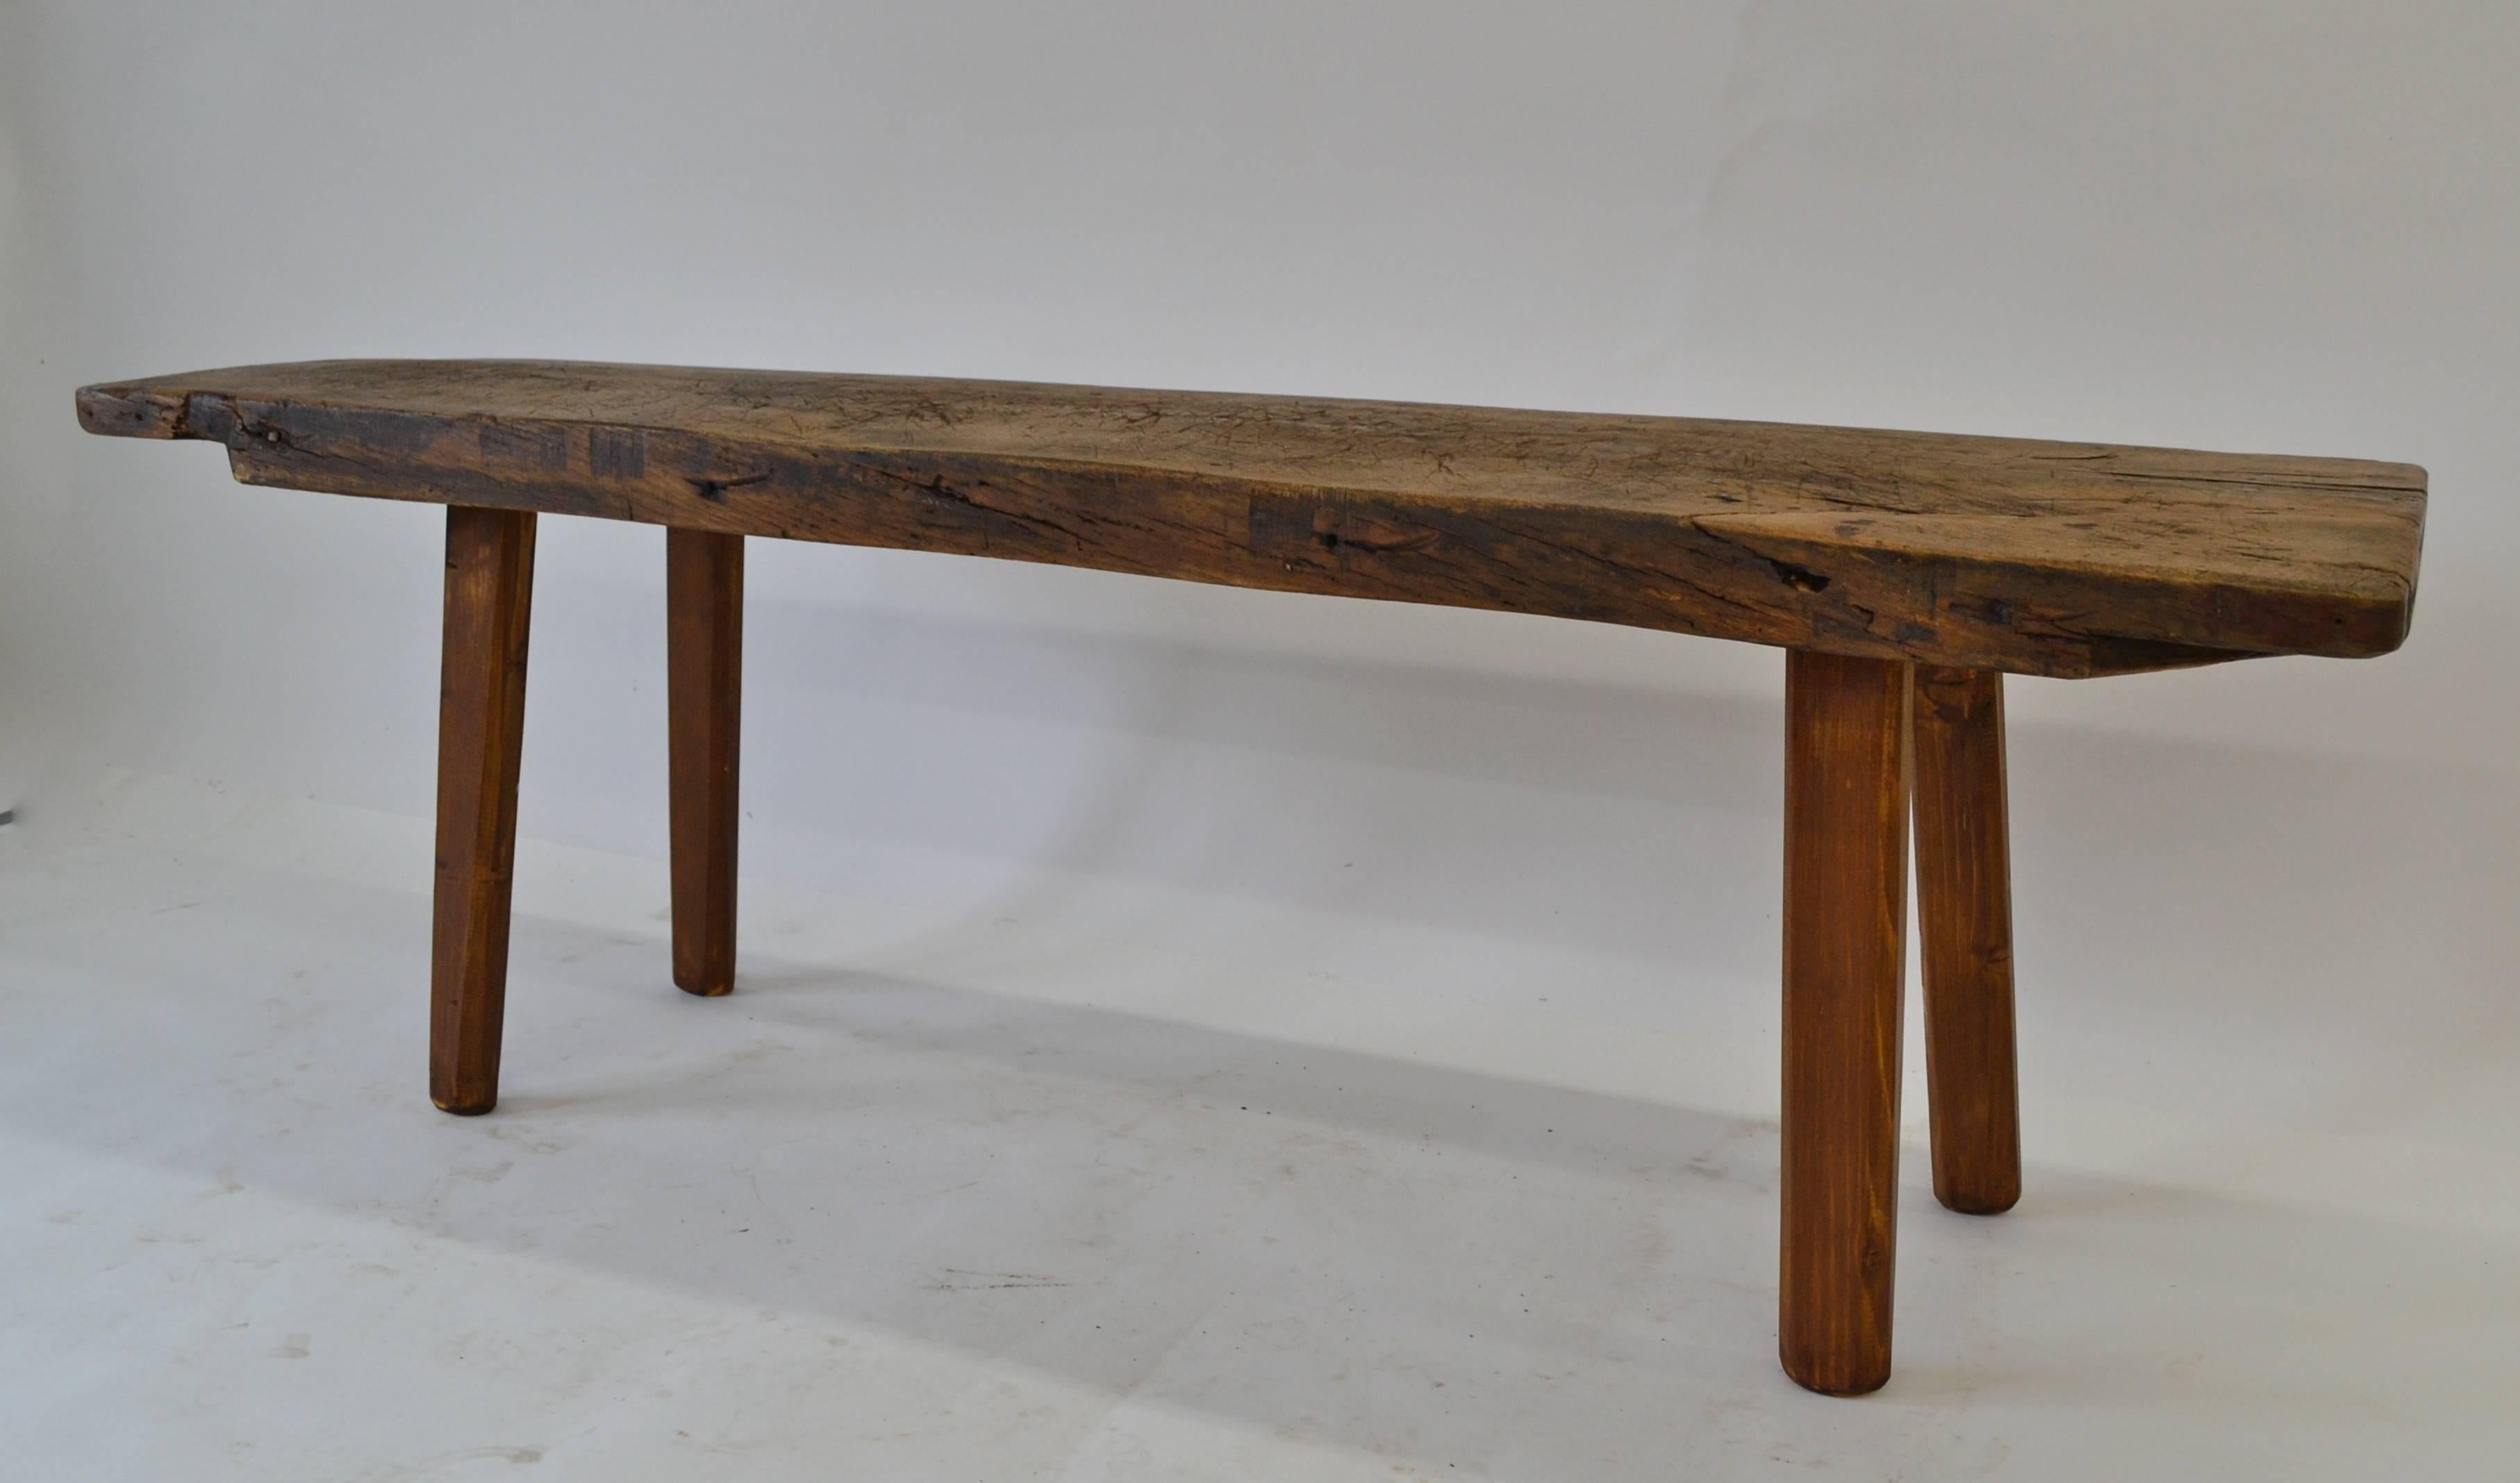 Hungarian Oak and Pine Butcher's Block Coffee Table